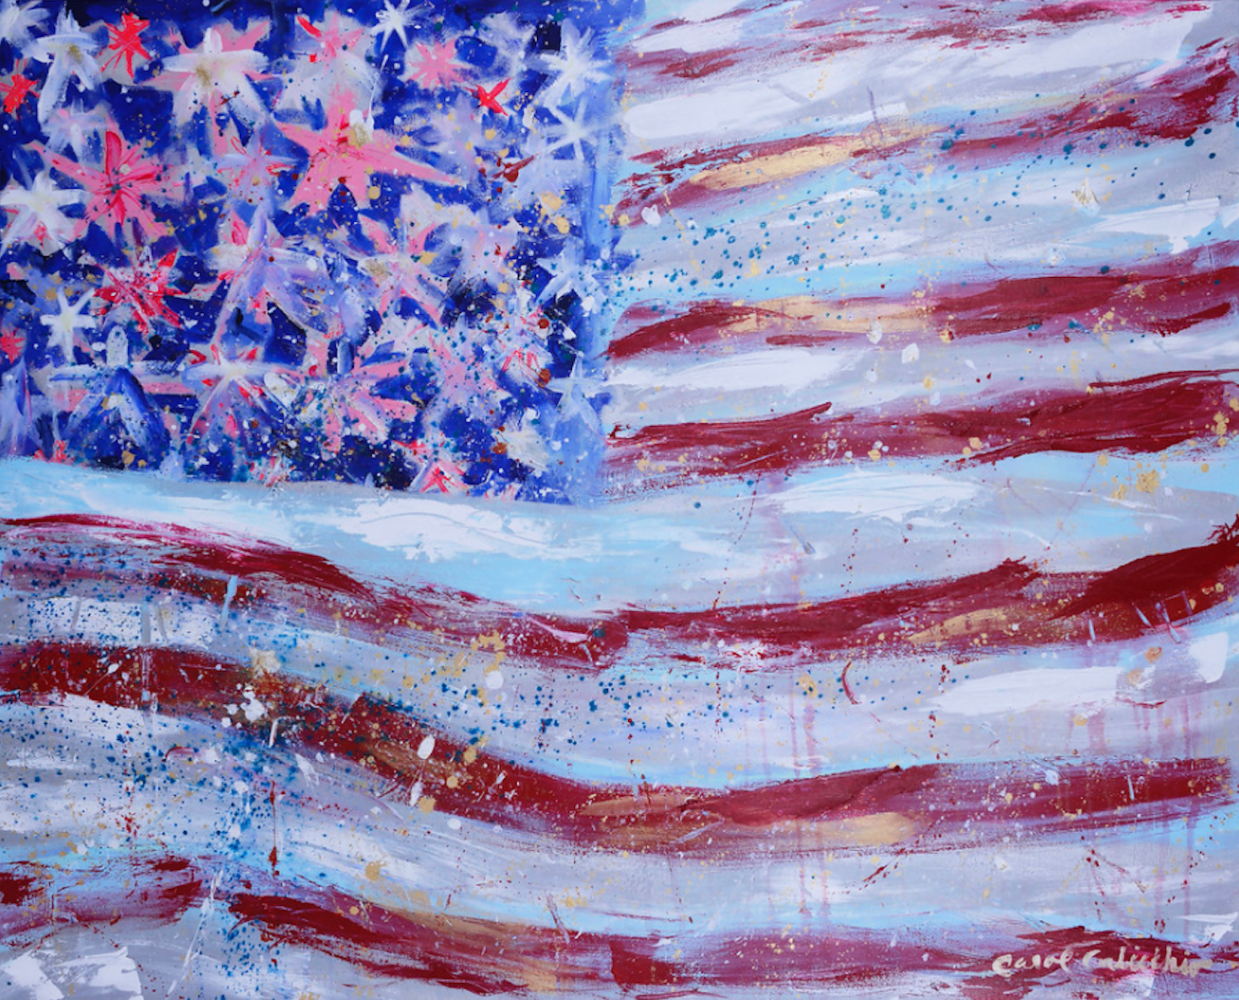 American Dream, 2023

Acrylic on Canvas

48 x 60 inches

Purchase